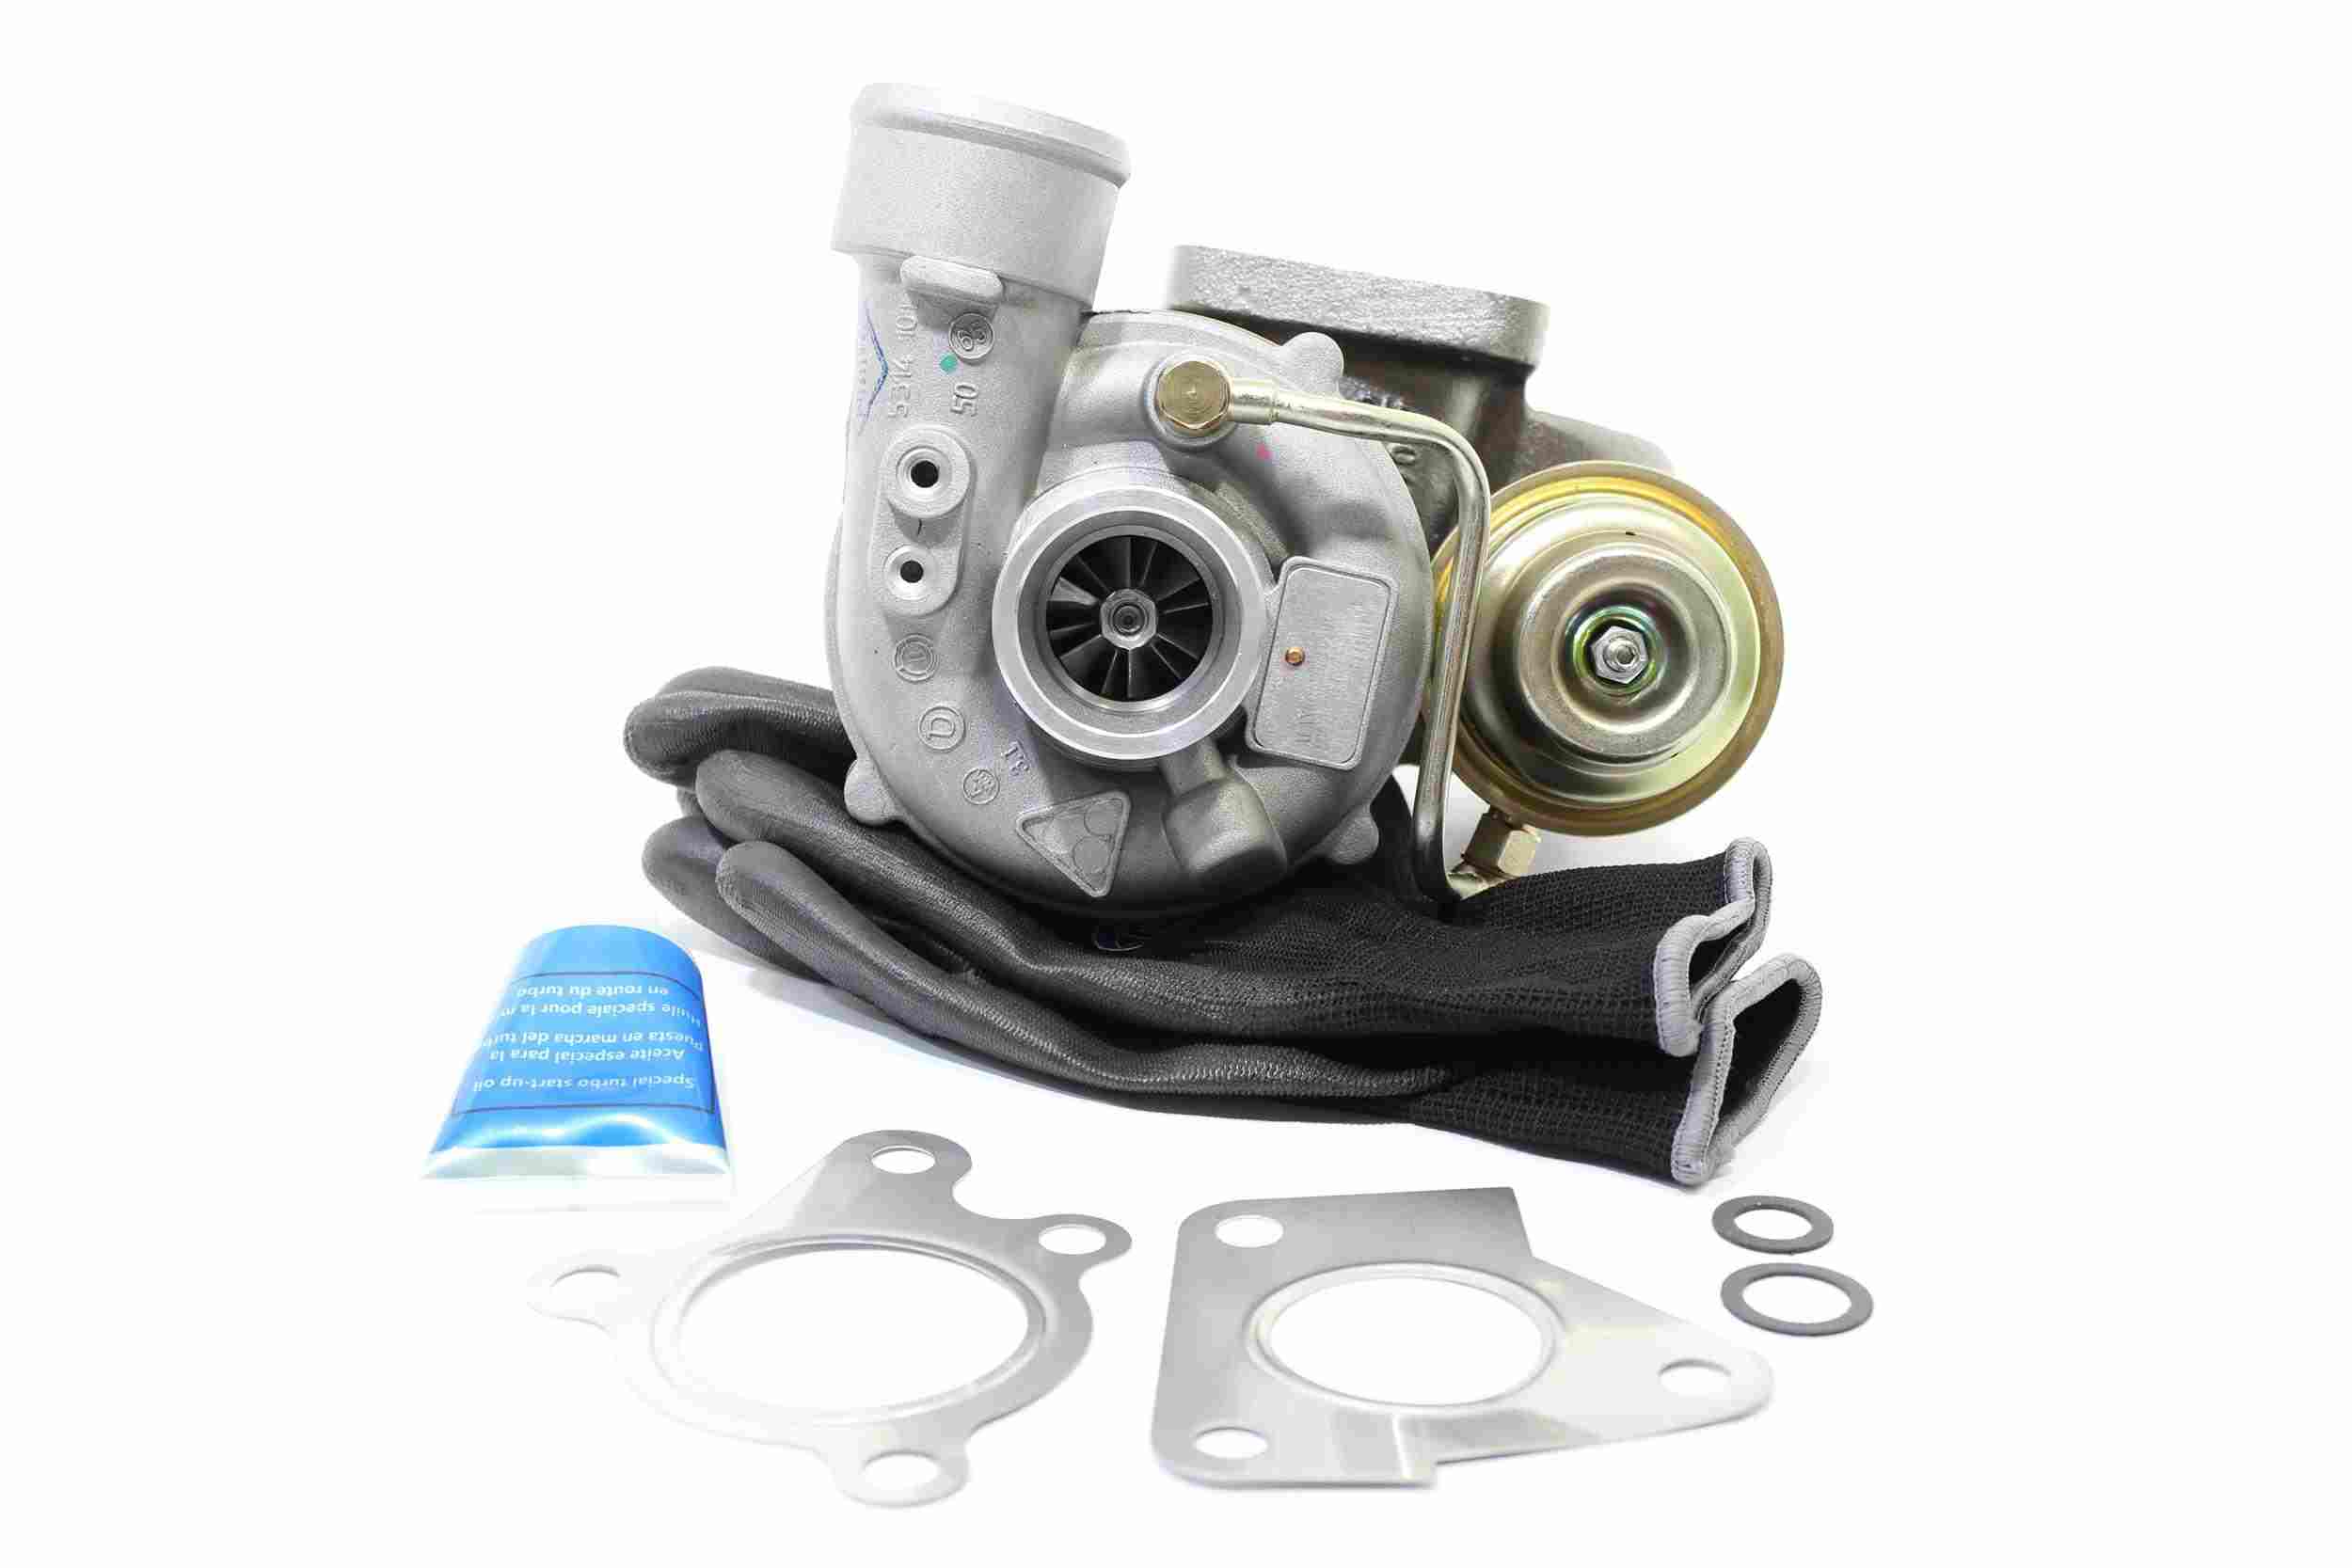 Image of ALANKO Turbocharger VW 10900769 068145701QV,068145701QX,068145702JV Turbolader,Charger, charging system 068145702JX,068145703H,068145704A,068145701QV